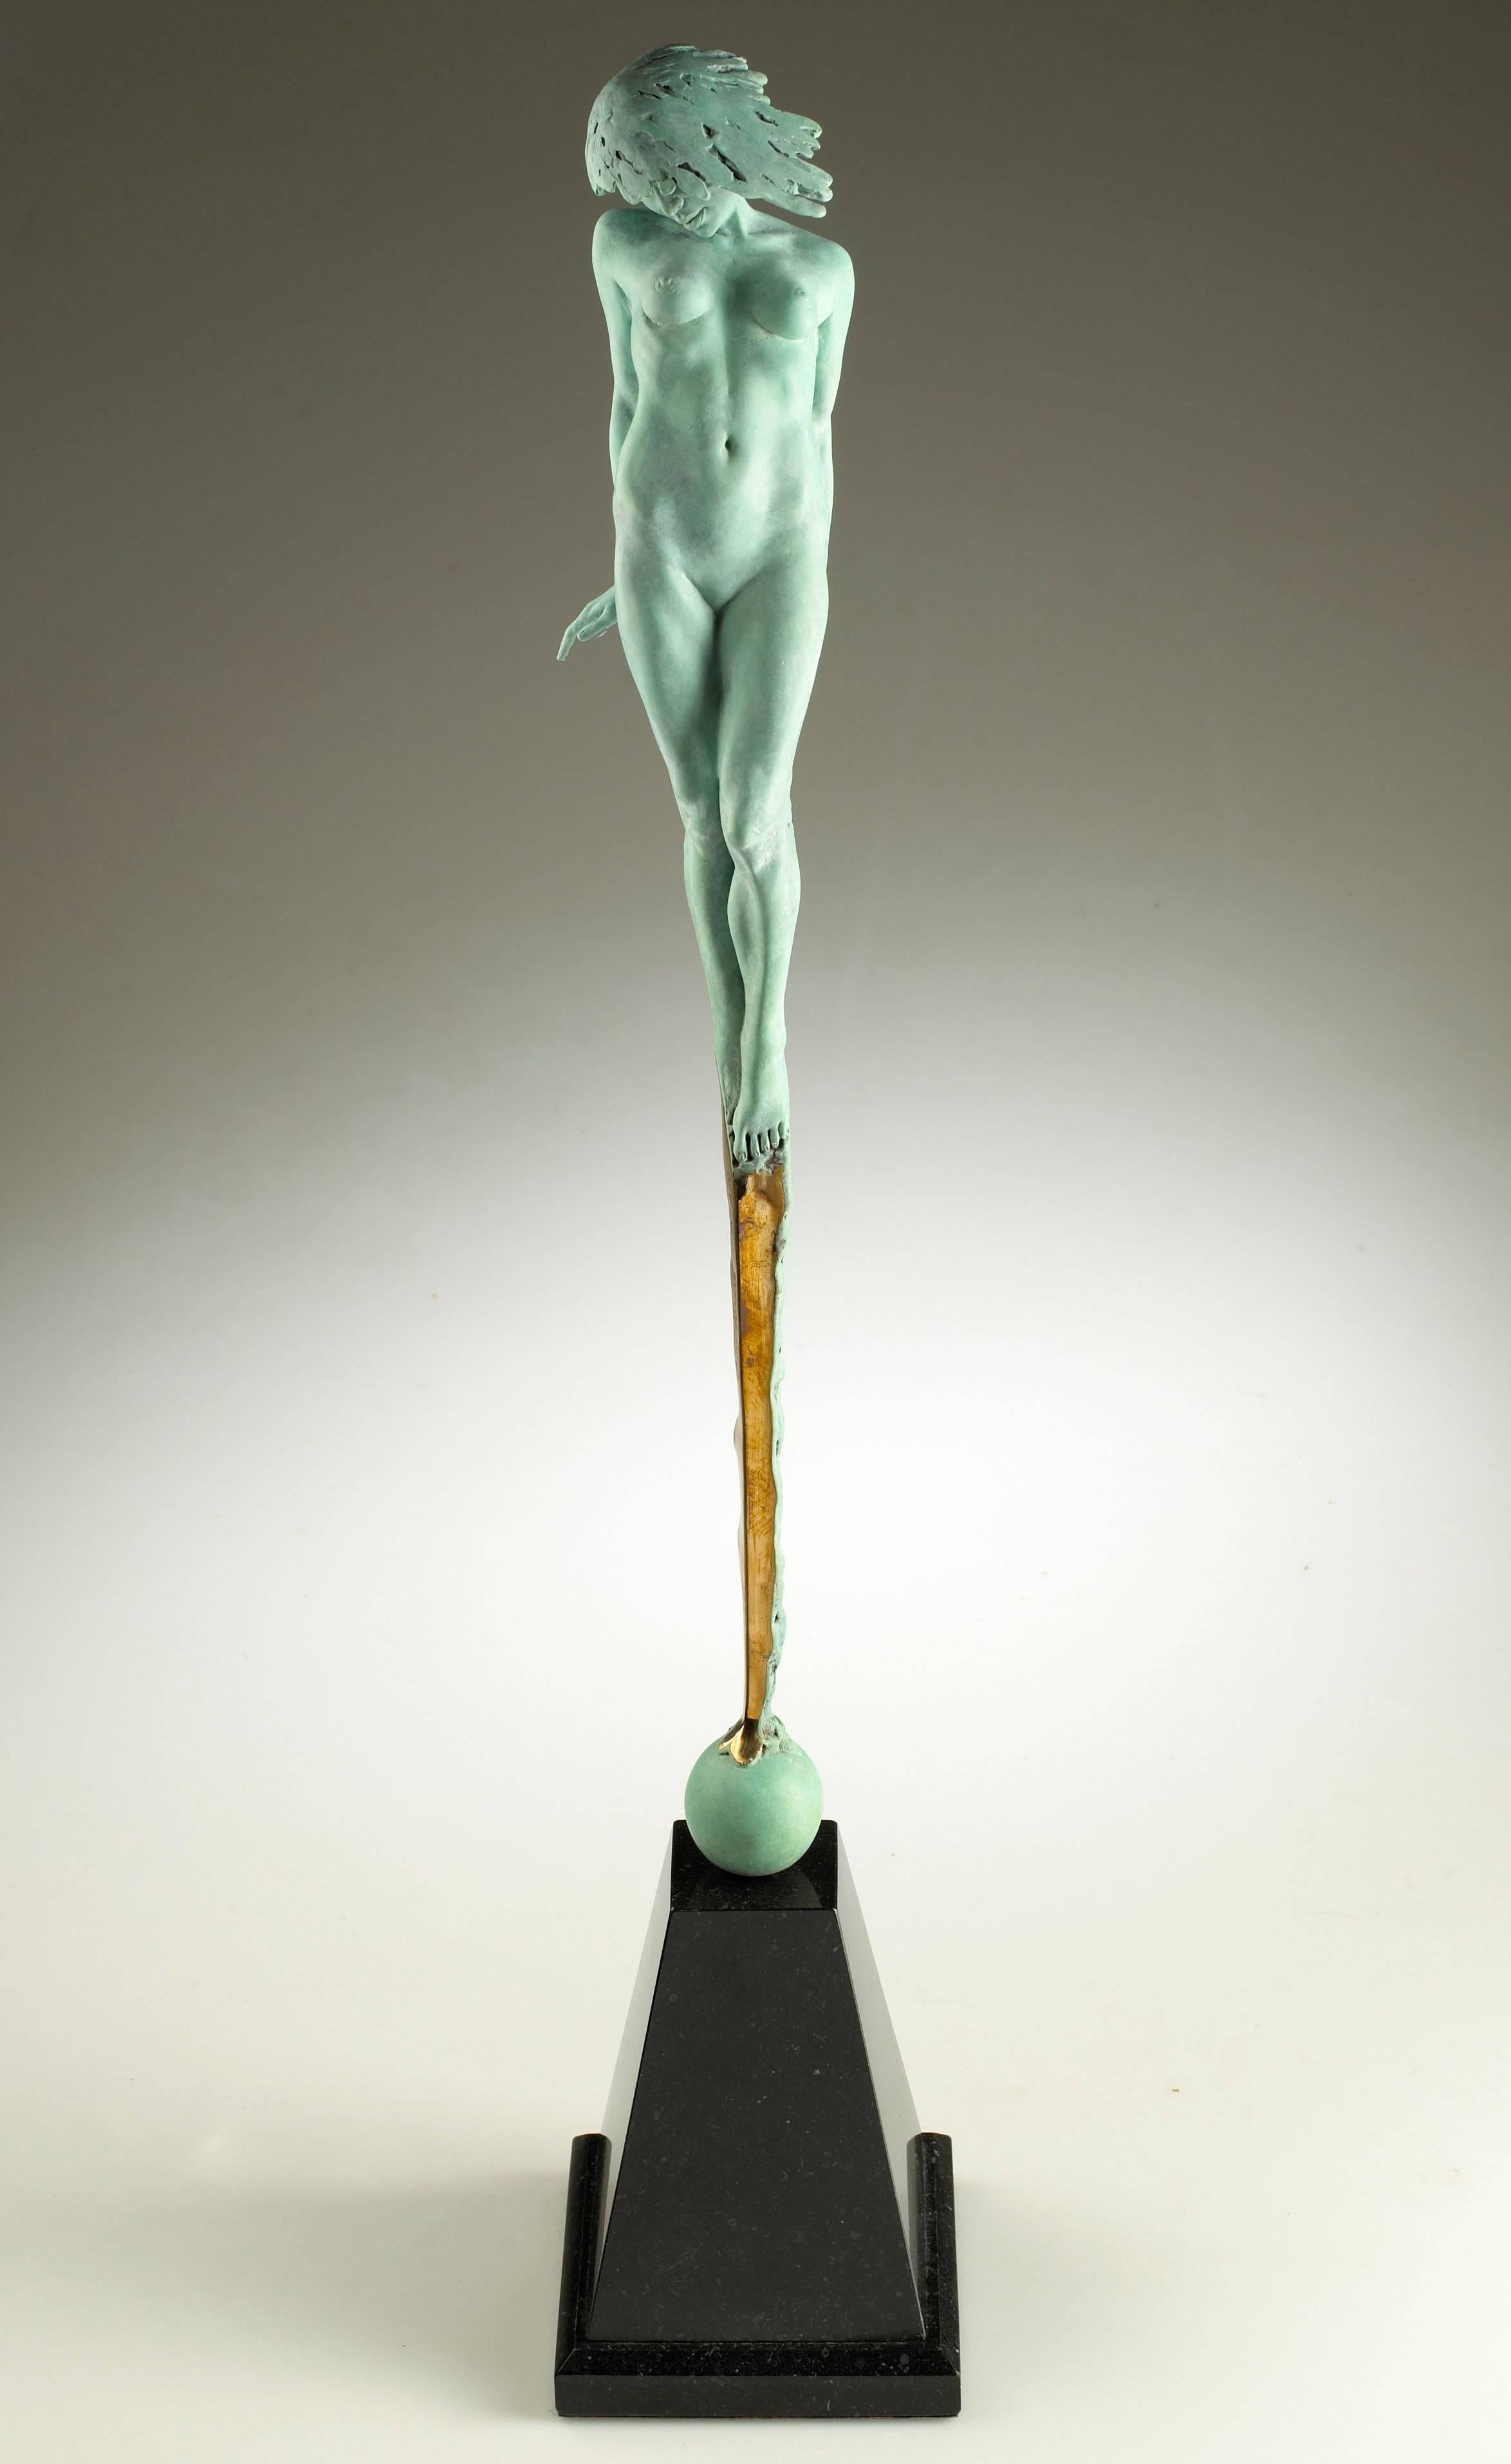 Contemporary Nude Bronze Sculpture 'Le Pucelle' by Carl Payne